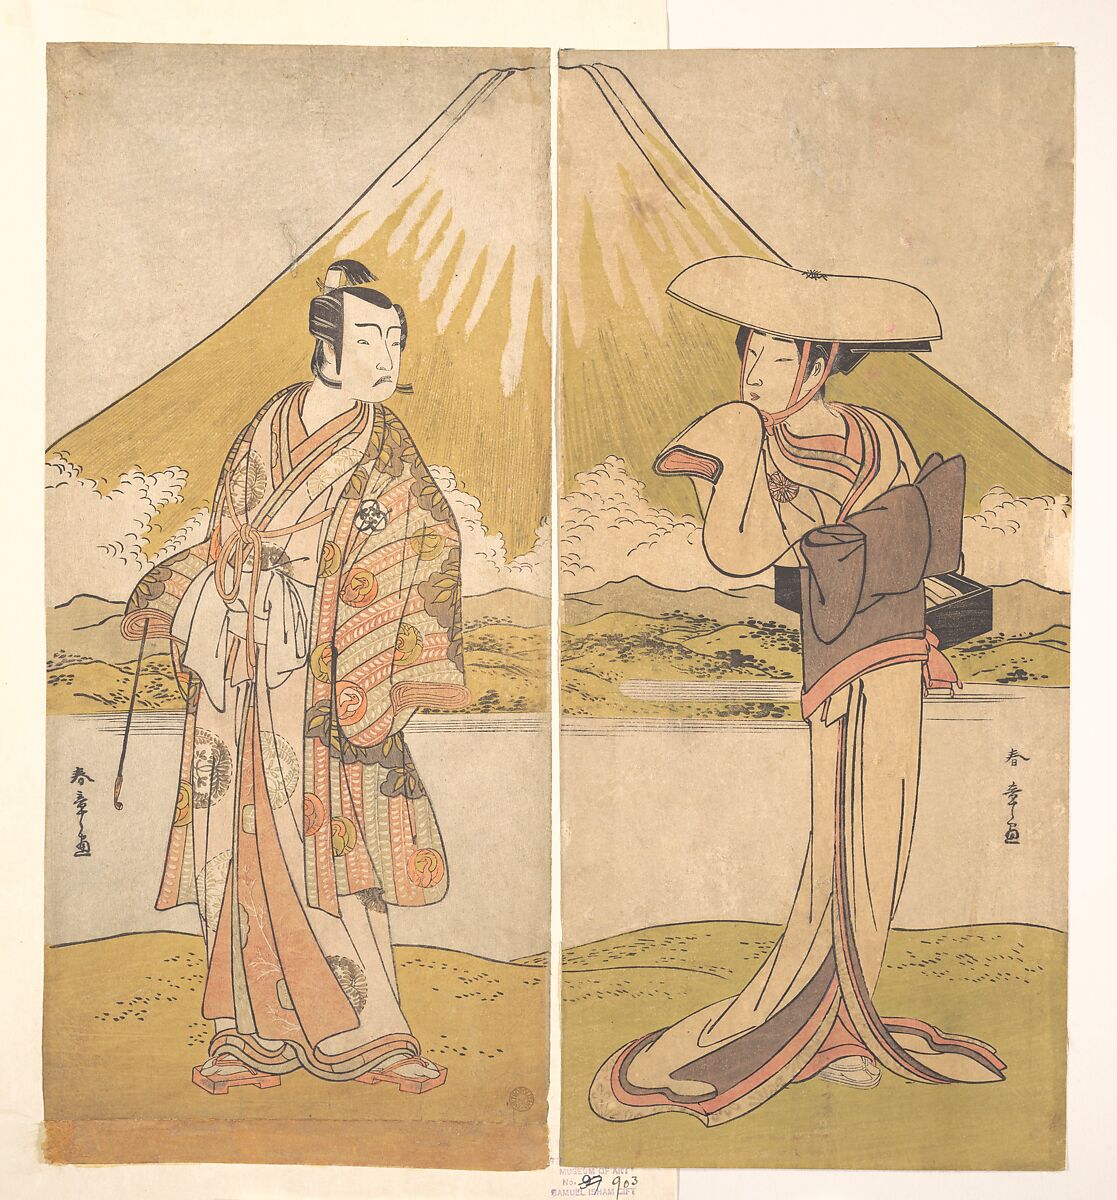 The Actor Bando Mitsugoro as a Man in Sumptuous Raiment, Standing in a Field, Mount Fuji in the Background, Katsukawa Shunshō　勝川春章 (Japanese, 1726–1792), Diptych of woodblock prints (nishiki-e); ink and color on paper, Japan 